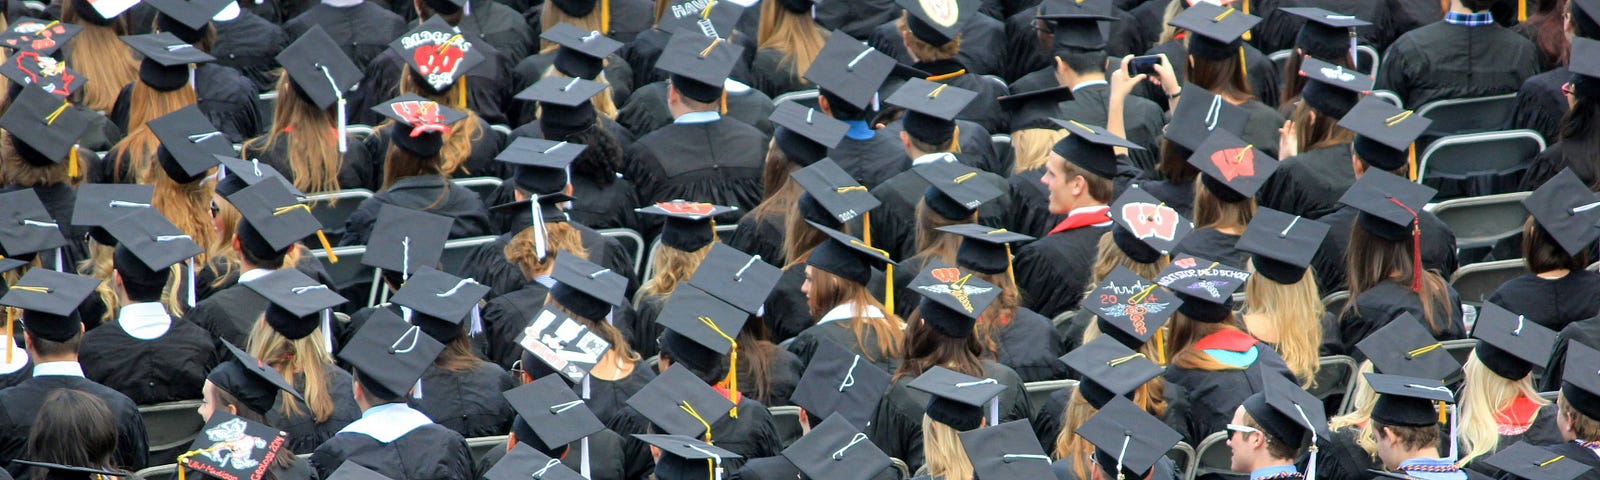 Graduates as seen from above, caps and tassels visible